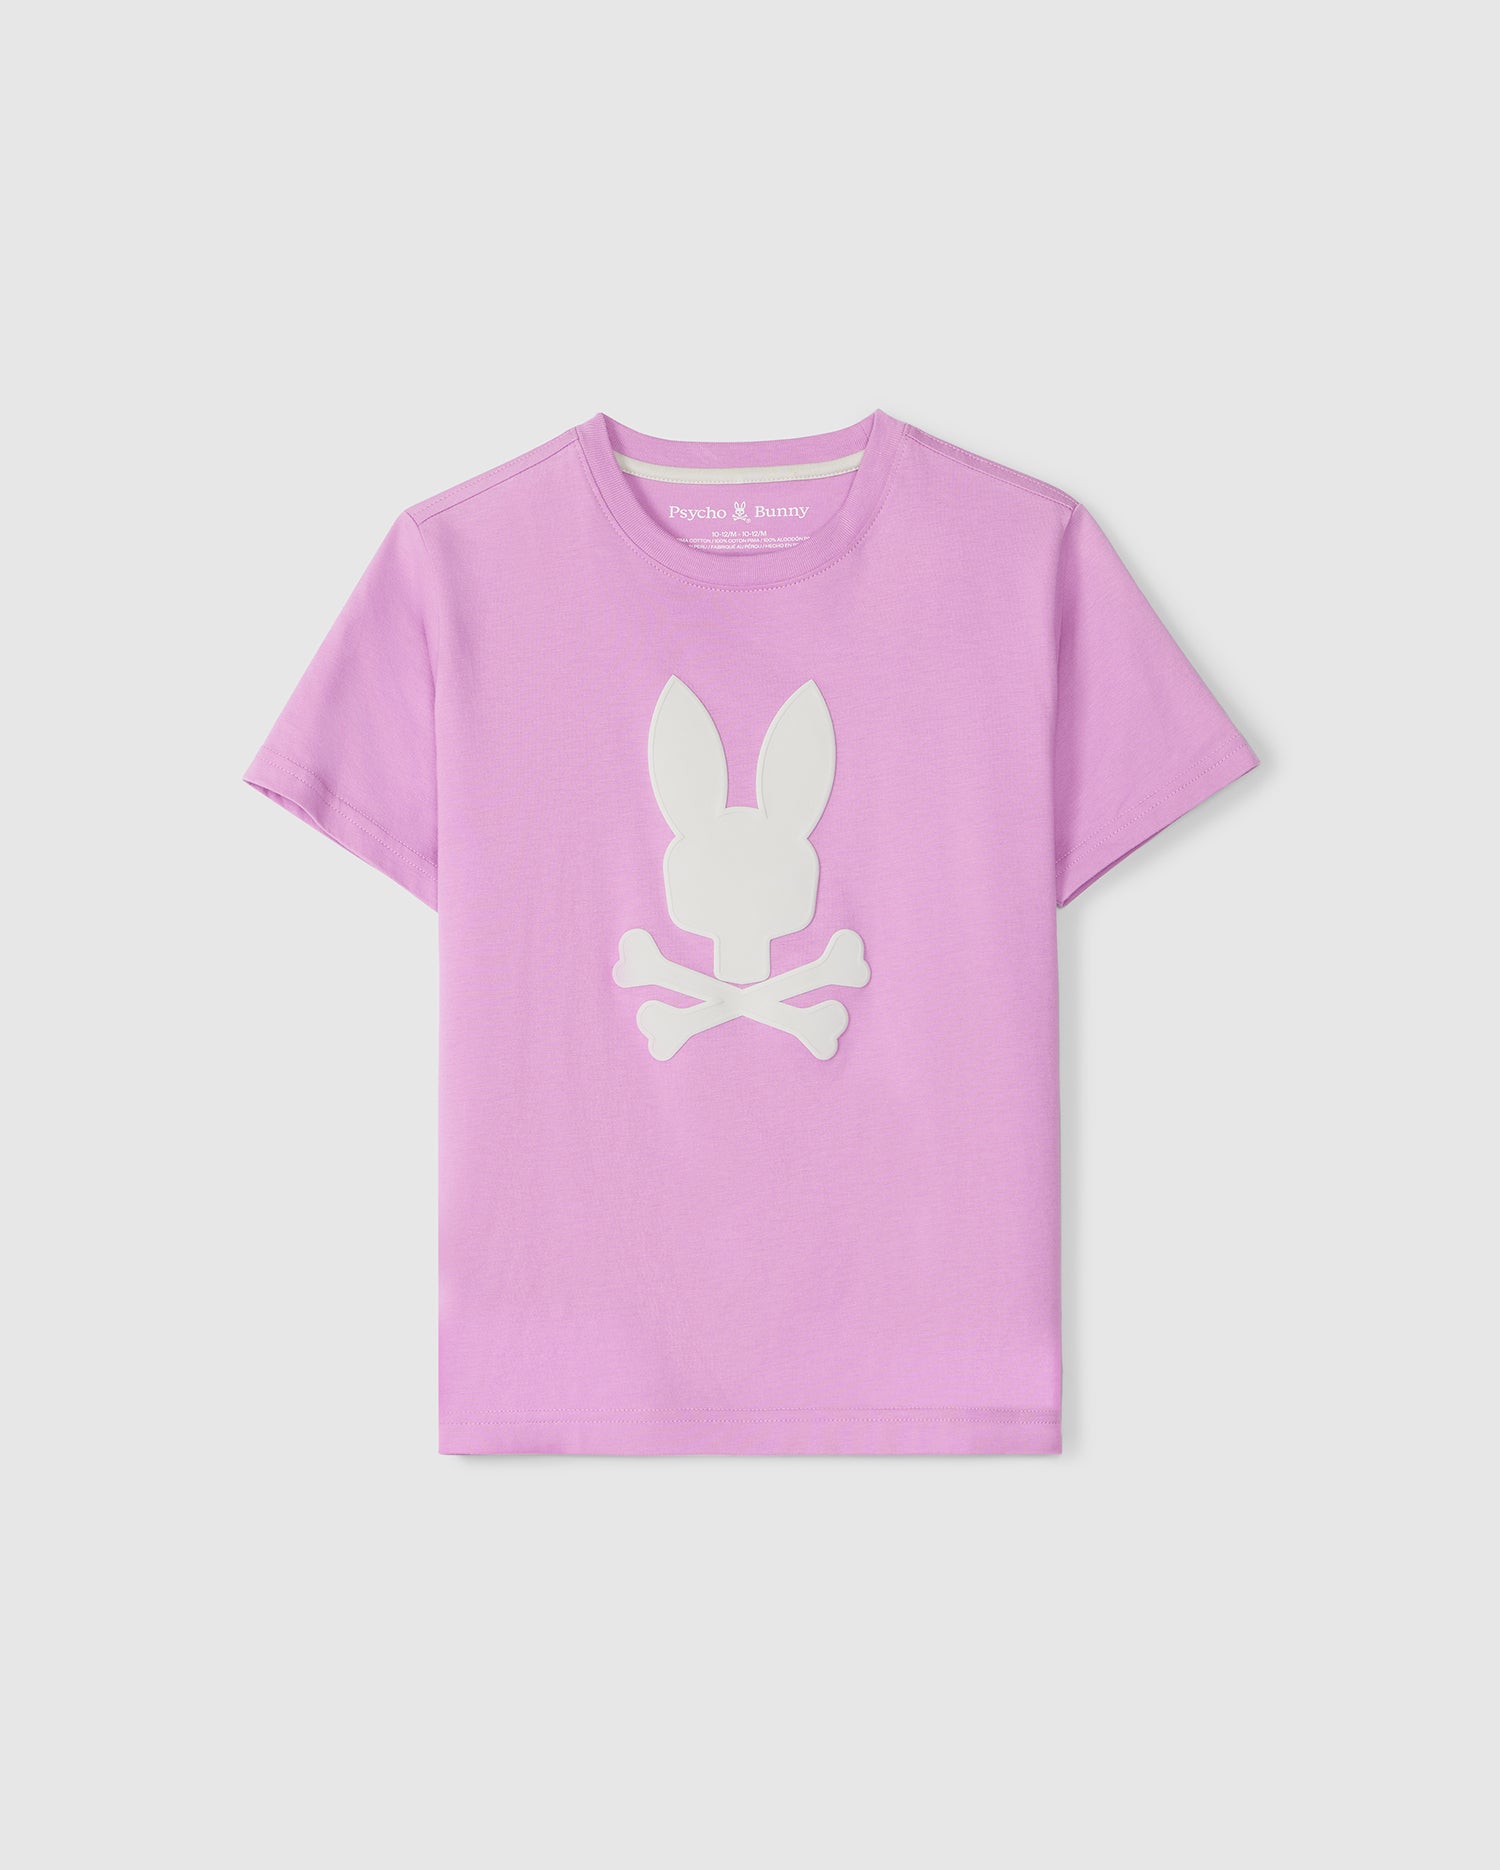 A pink children's KIDS HOUSTON GRAPHIC TEE - B0U607C200 from Psycho Bunny featuring a white silhouette of a bunny sitting over crossed bones, displayed against a plain background.